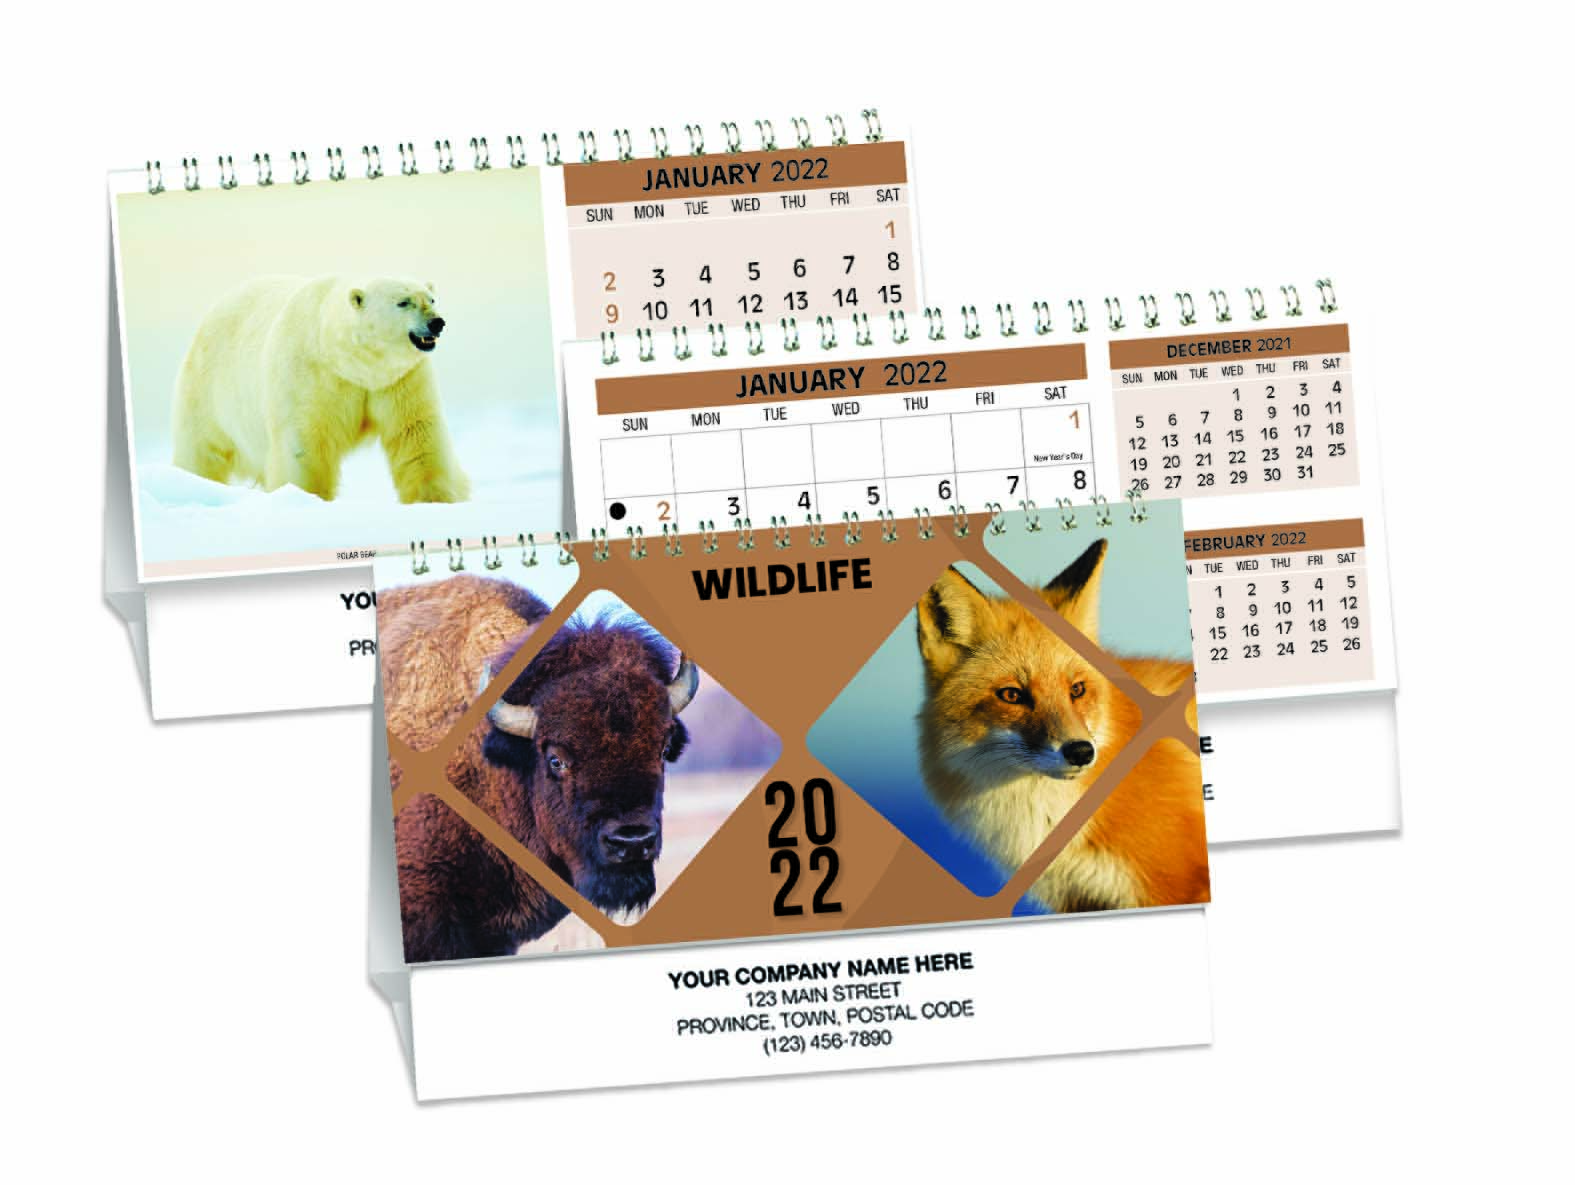 Wildlife themed desktop 2022 calendars with images of penguins, coyotes, raccoons, polar bears and owls.